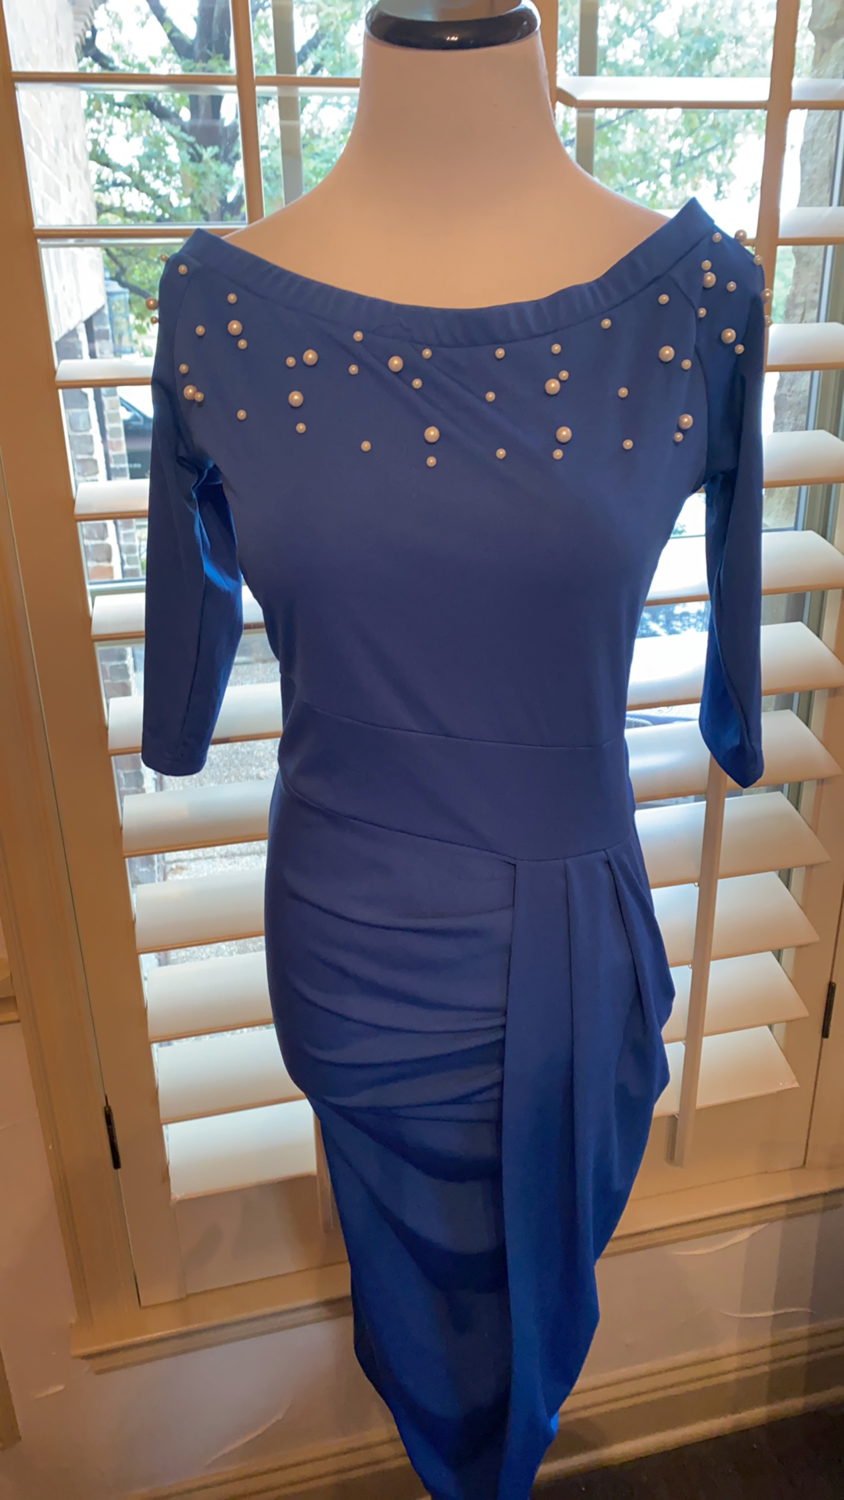 ONLY ONE Blue Pearl detail dress